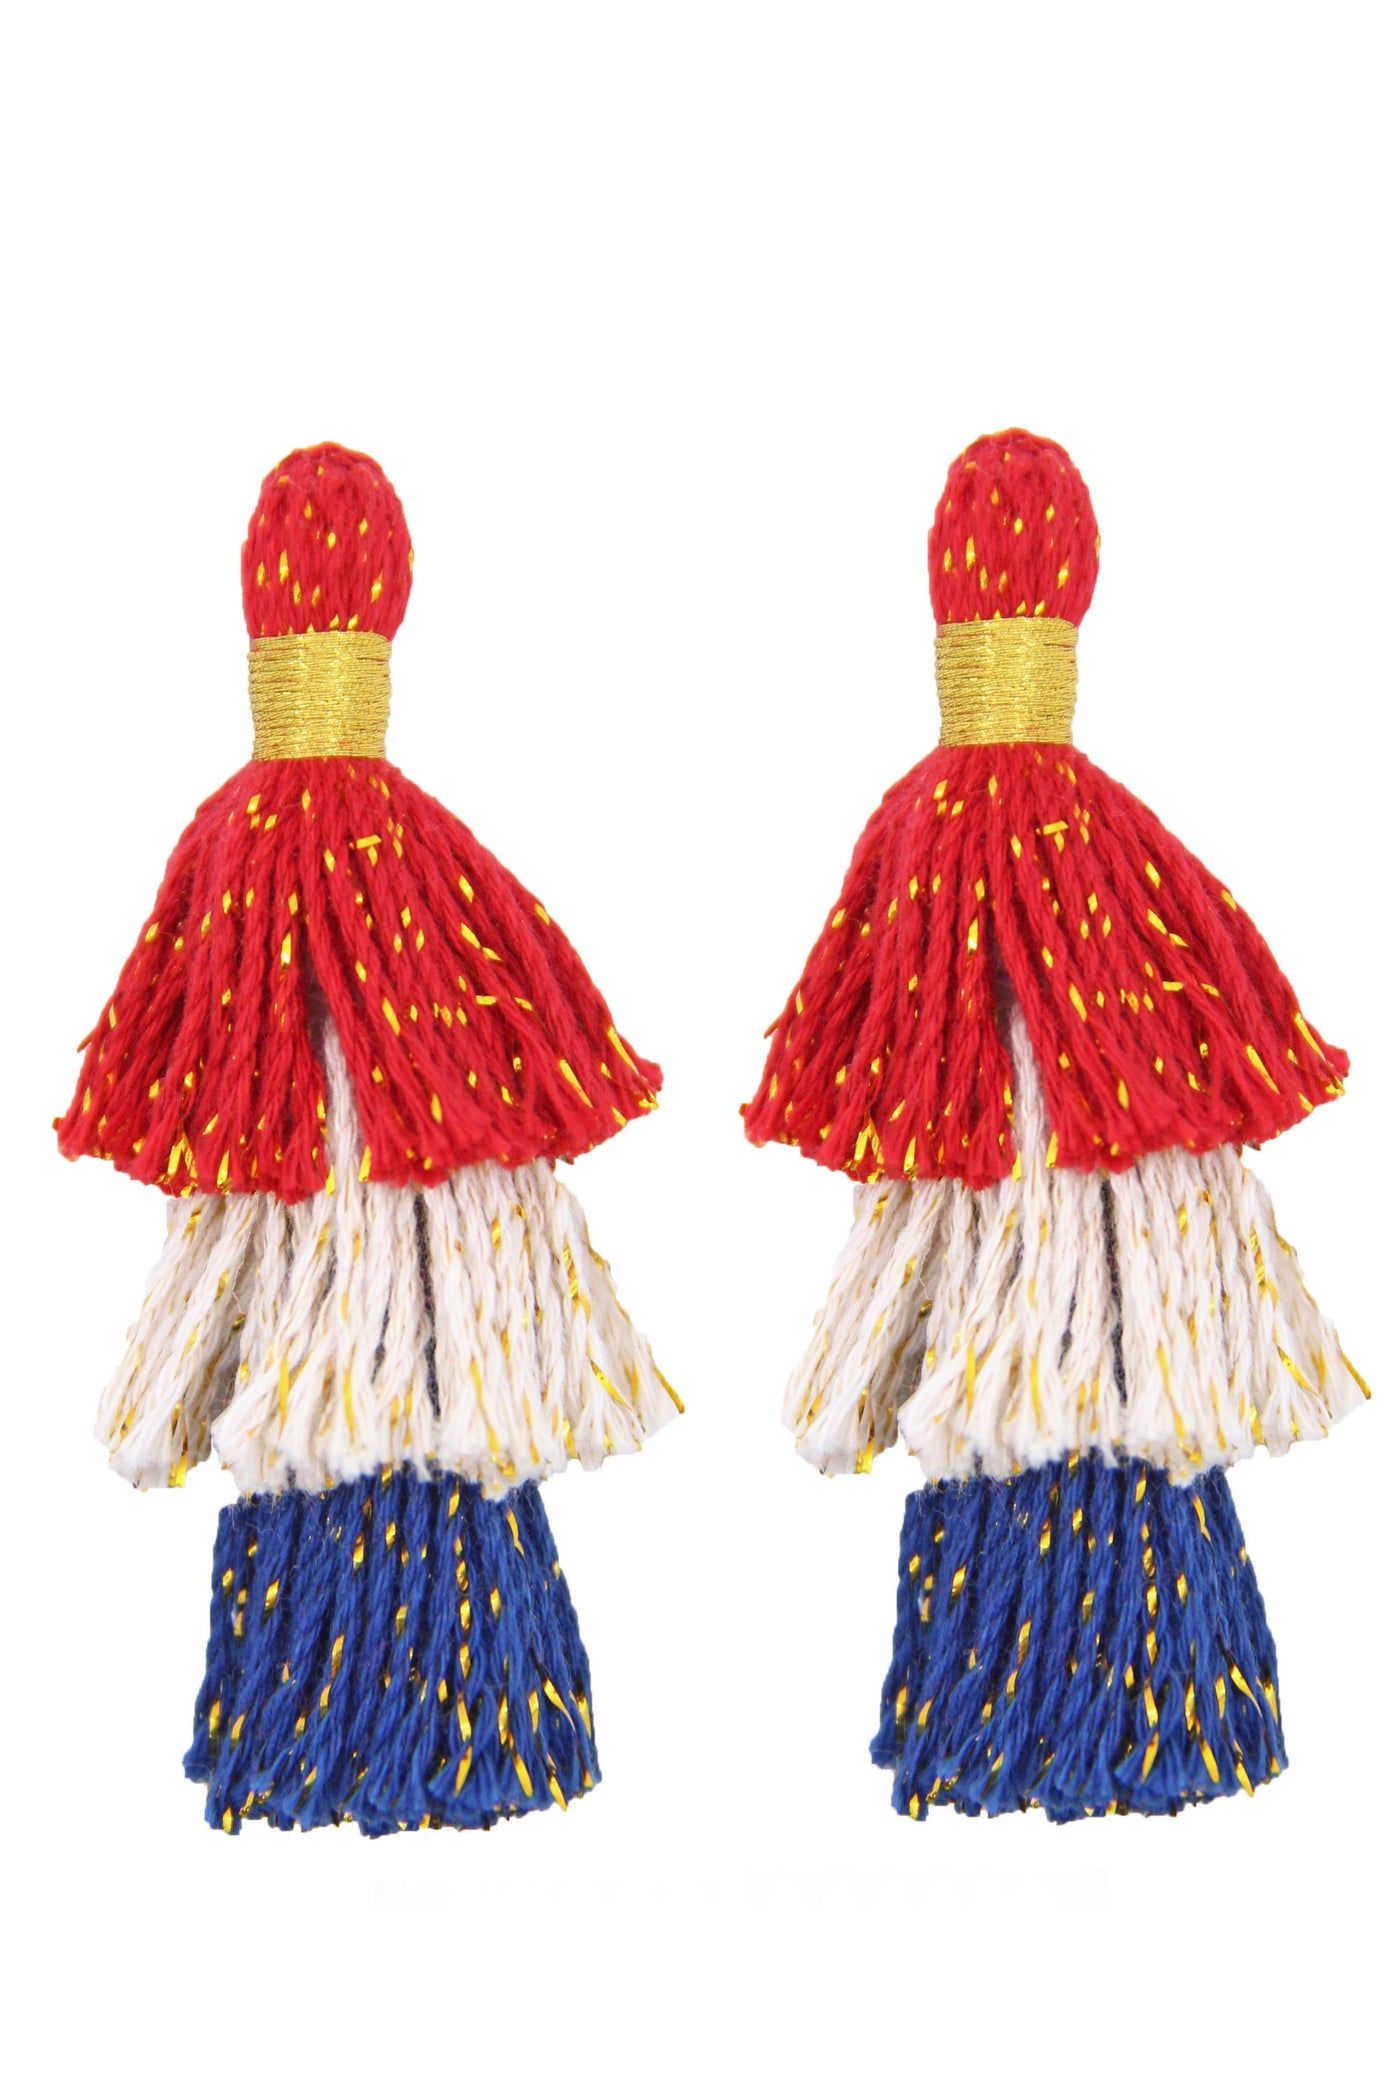 Red, White, and Blue tassels